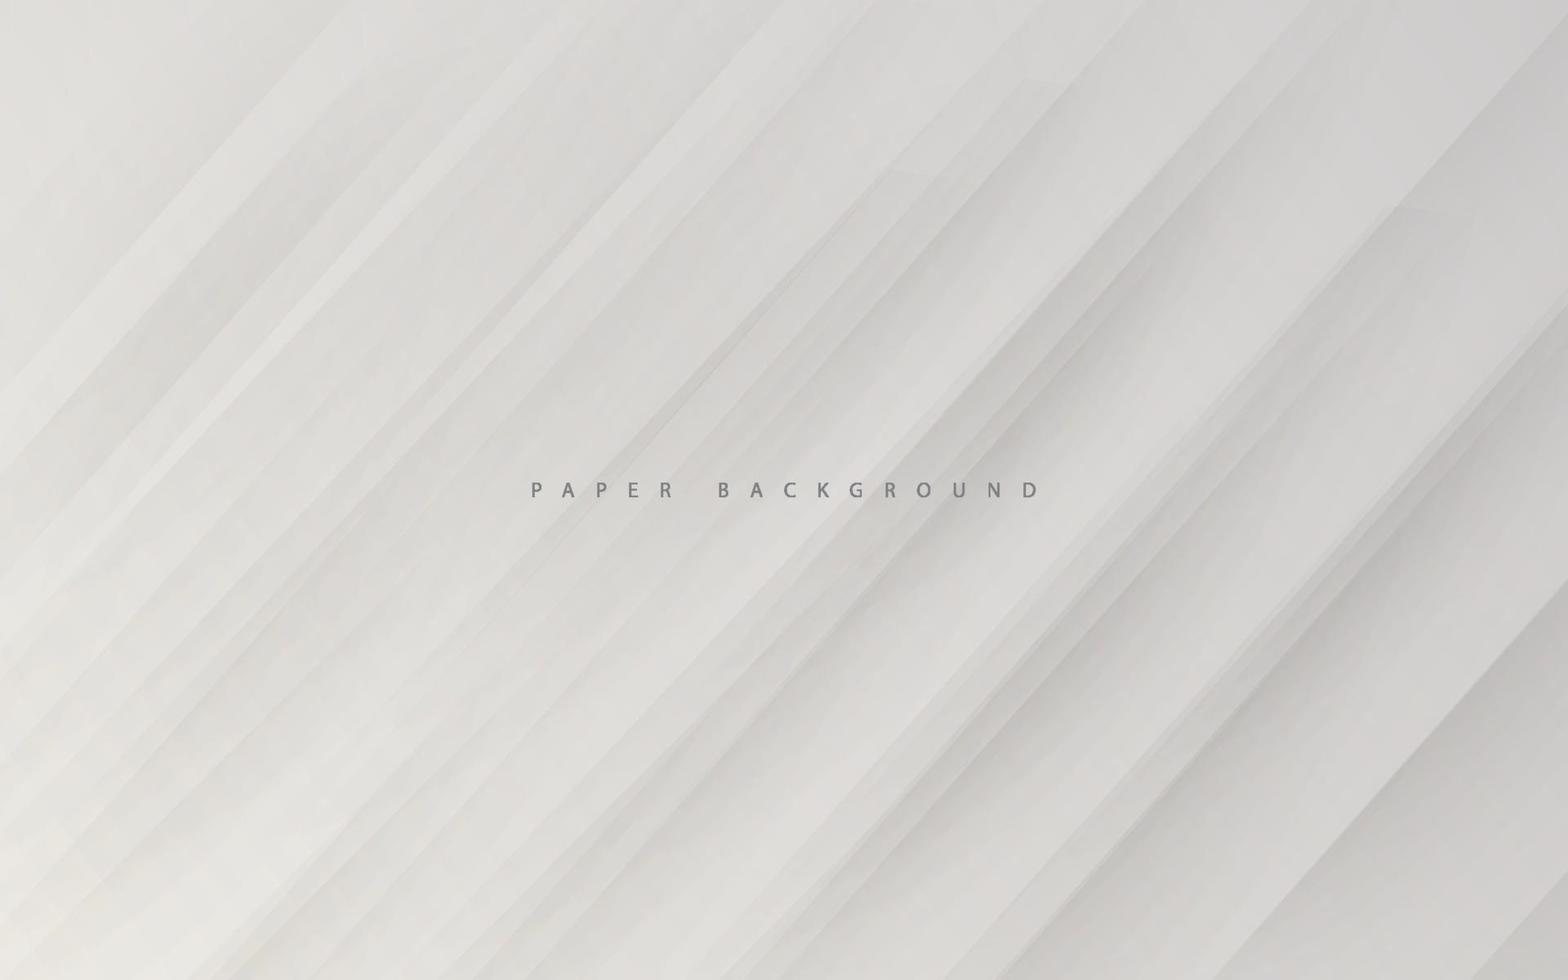 Abstract grey paper background vector